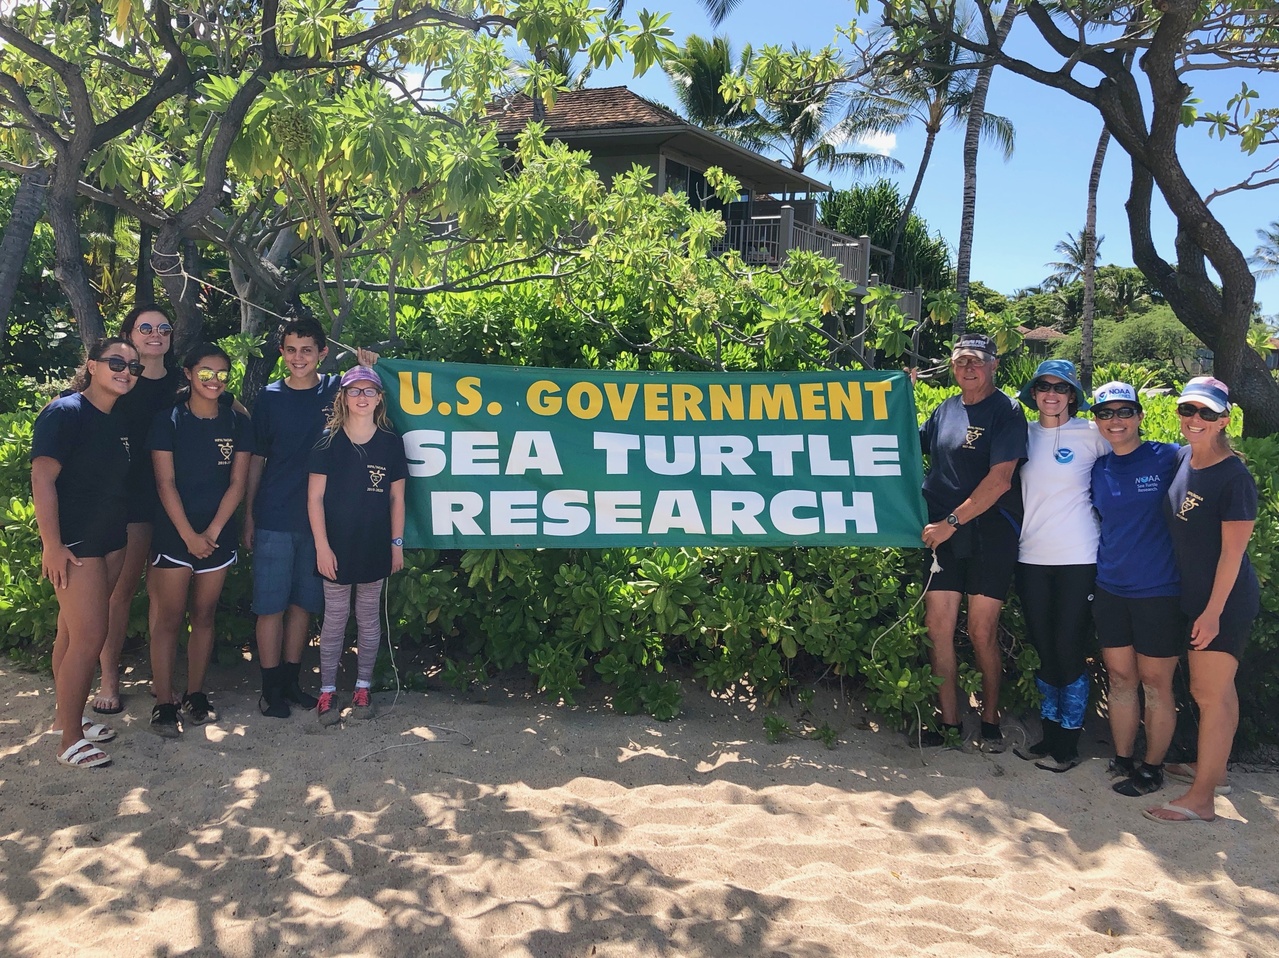 Image: A Long-Term Partnership Continues Prosperity for Sea turtles, Students, and Scientists